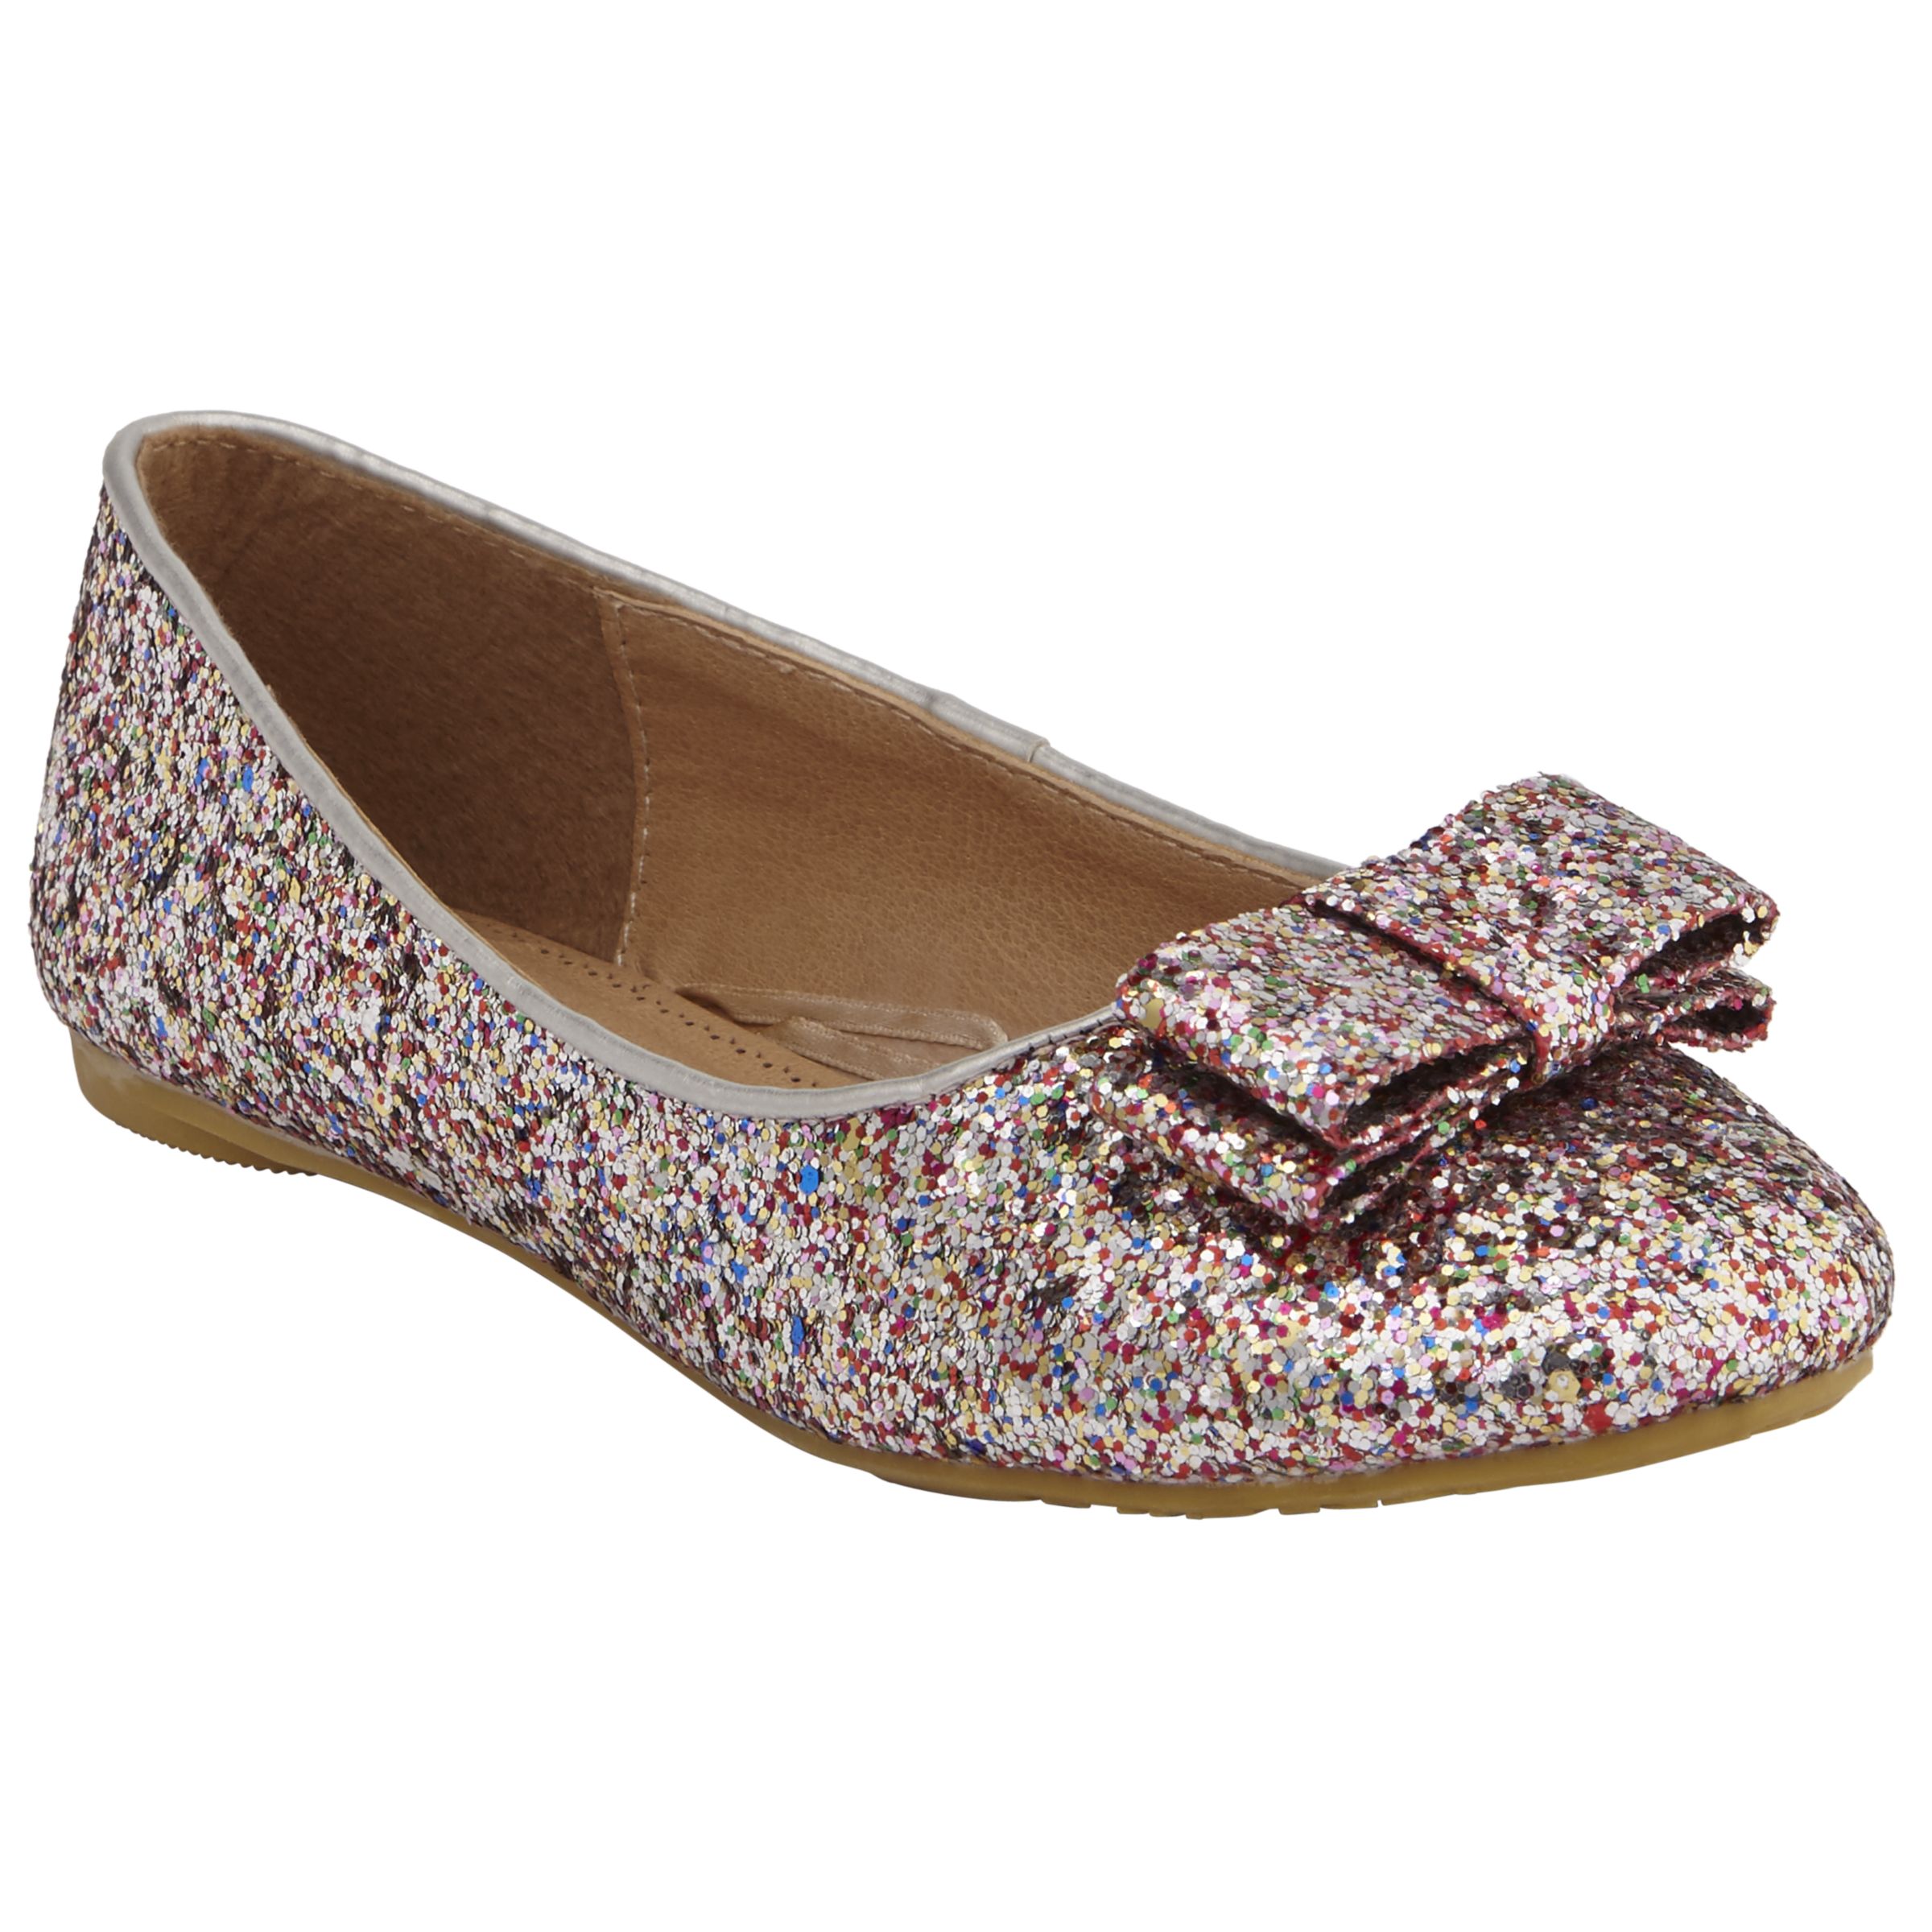 childrens sequin shoes